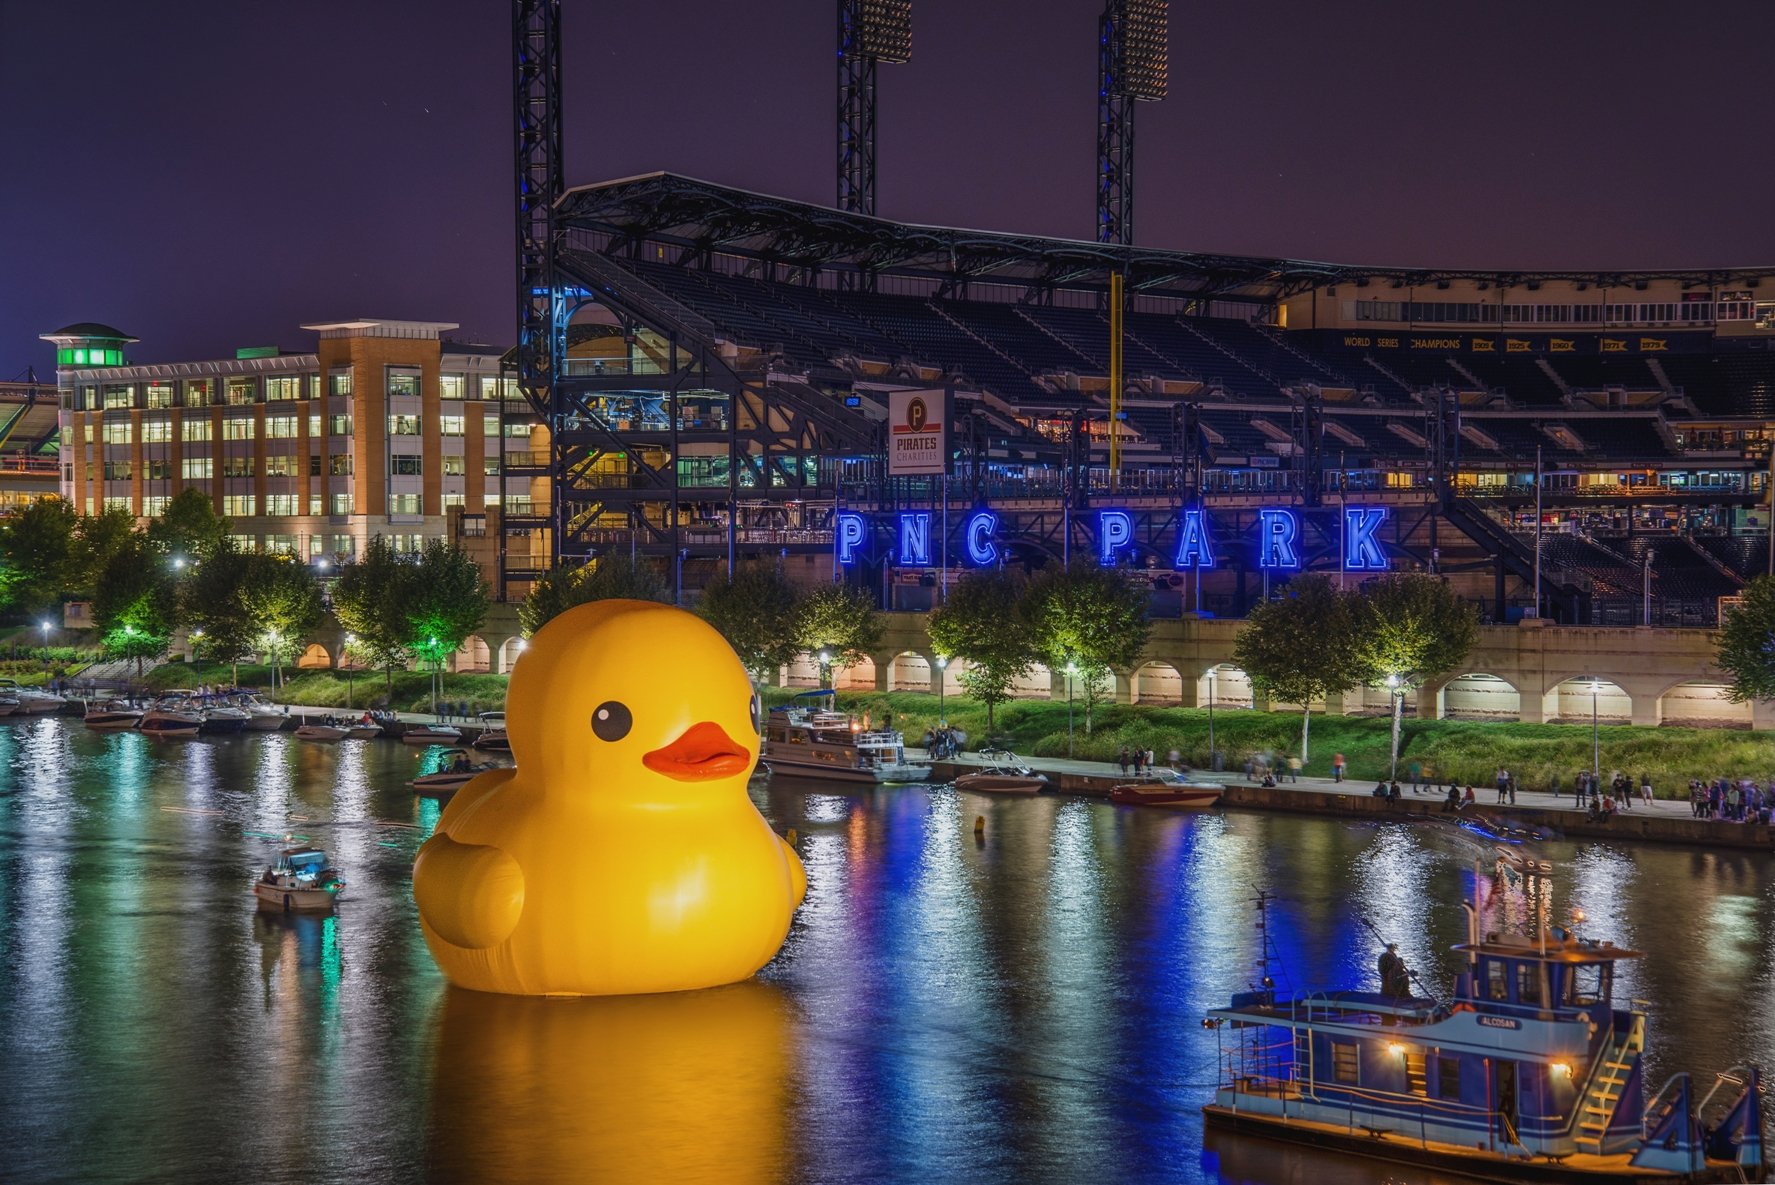 Giant Rubber Duck and Pittsburgh Pirates Playoff Baseball   Pittsburgh